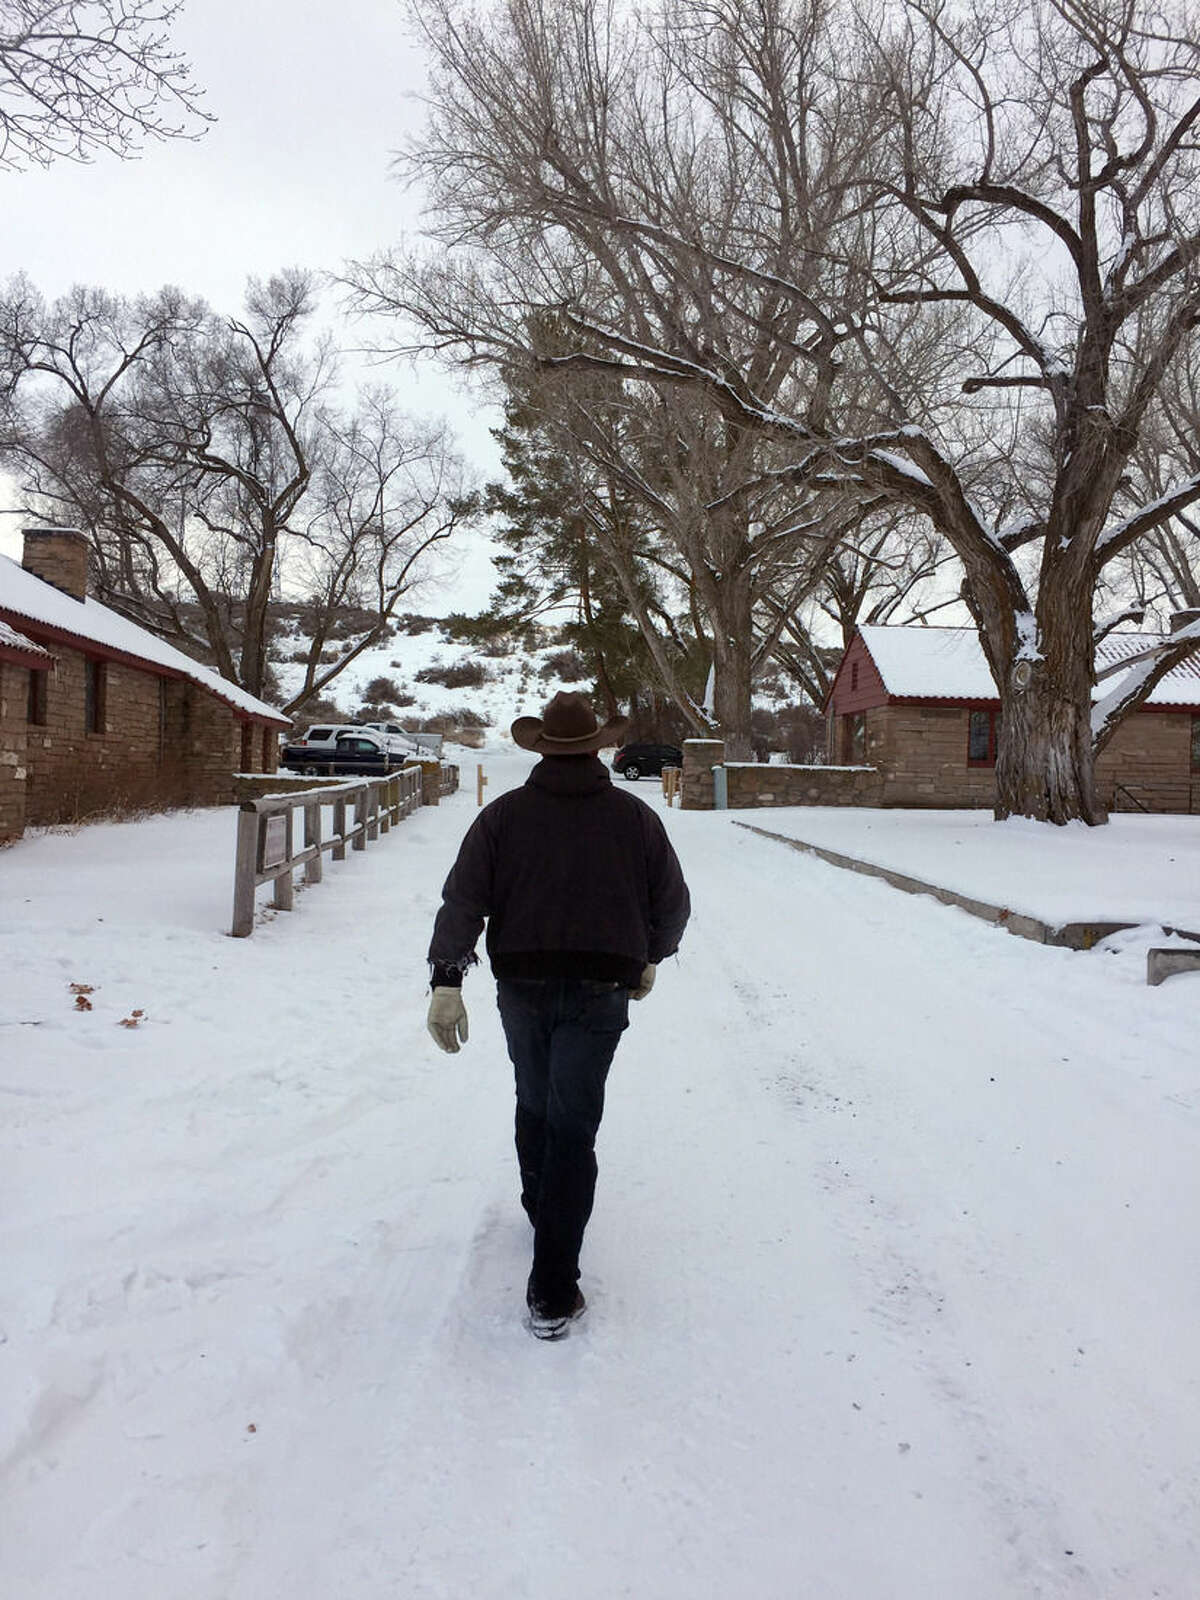 Ryan Bundy walks at the Malheur National Wildlife Refuge near Burns, Ore., Sunday, Jan. 3, 2016. Bundy is one of the protesters occupying the refuge to object to a prison sentence for local ranchers for burning federal land. (AP Photo/Rebecca Boone)